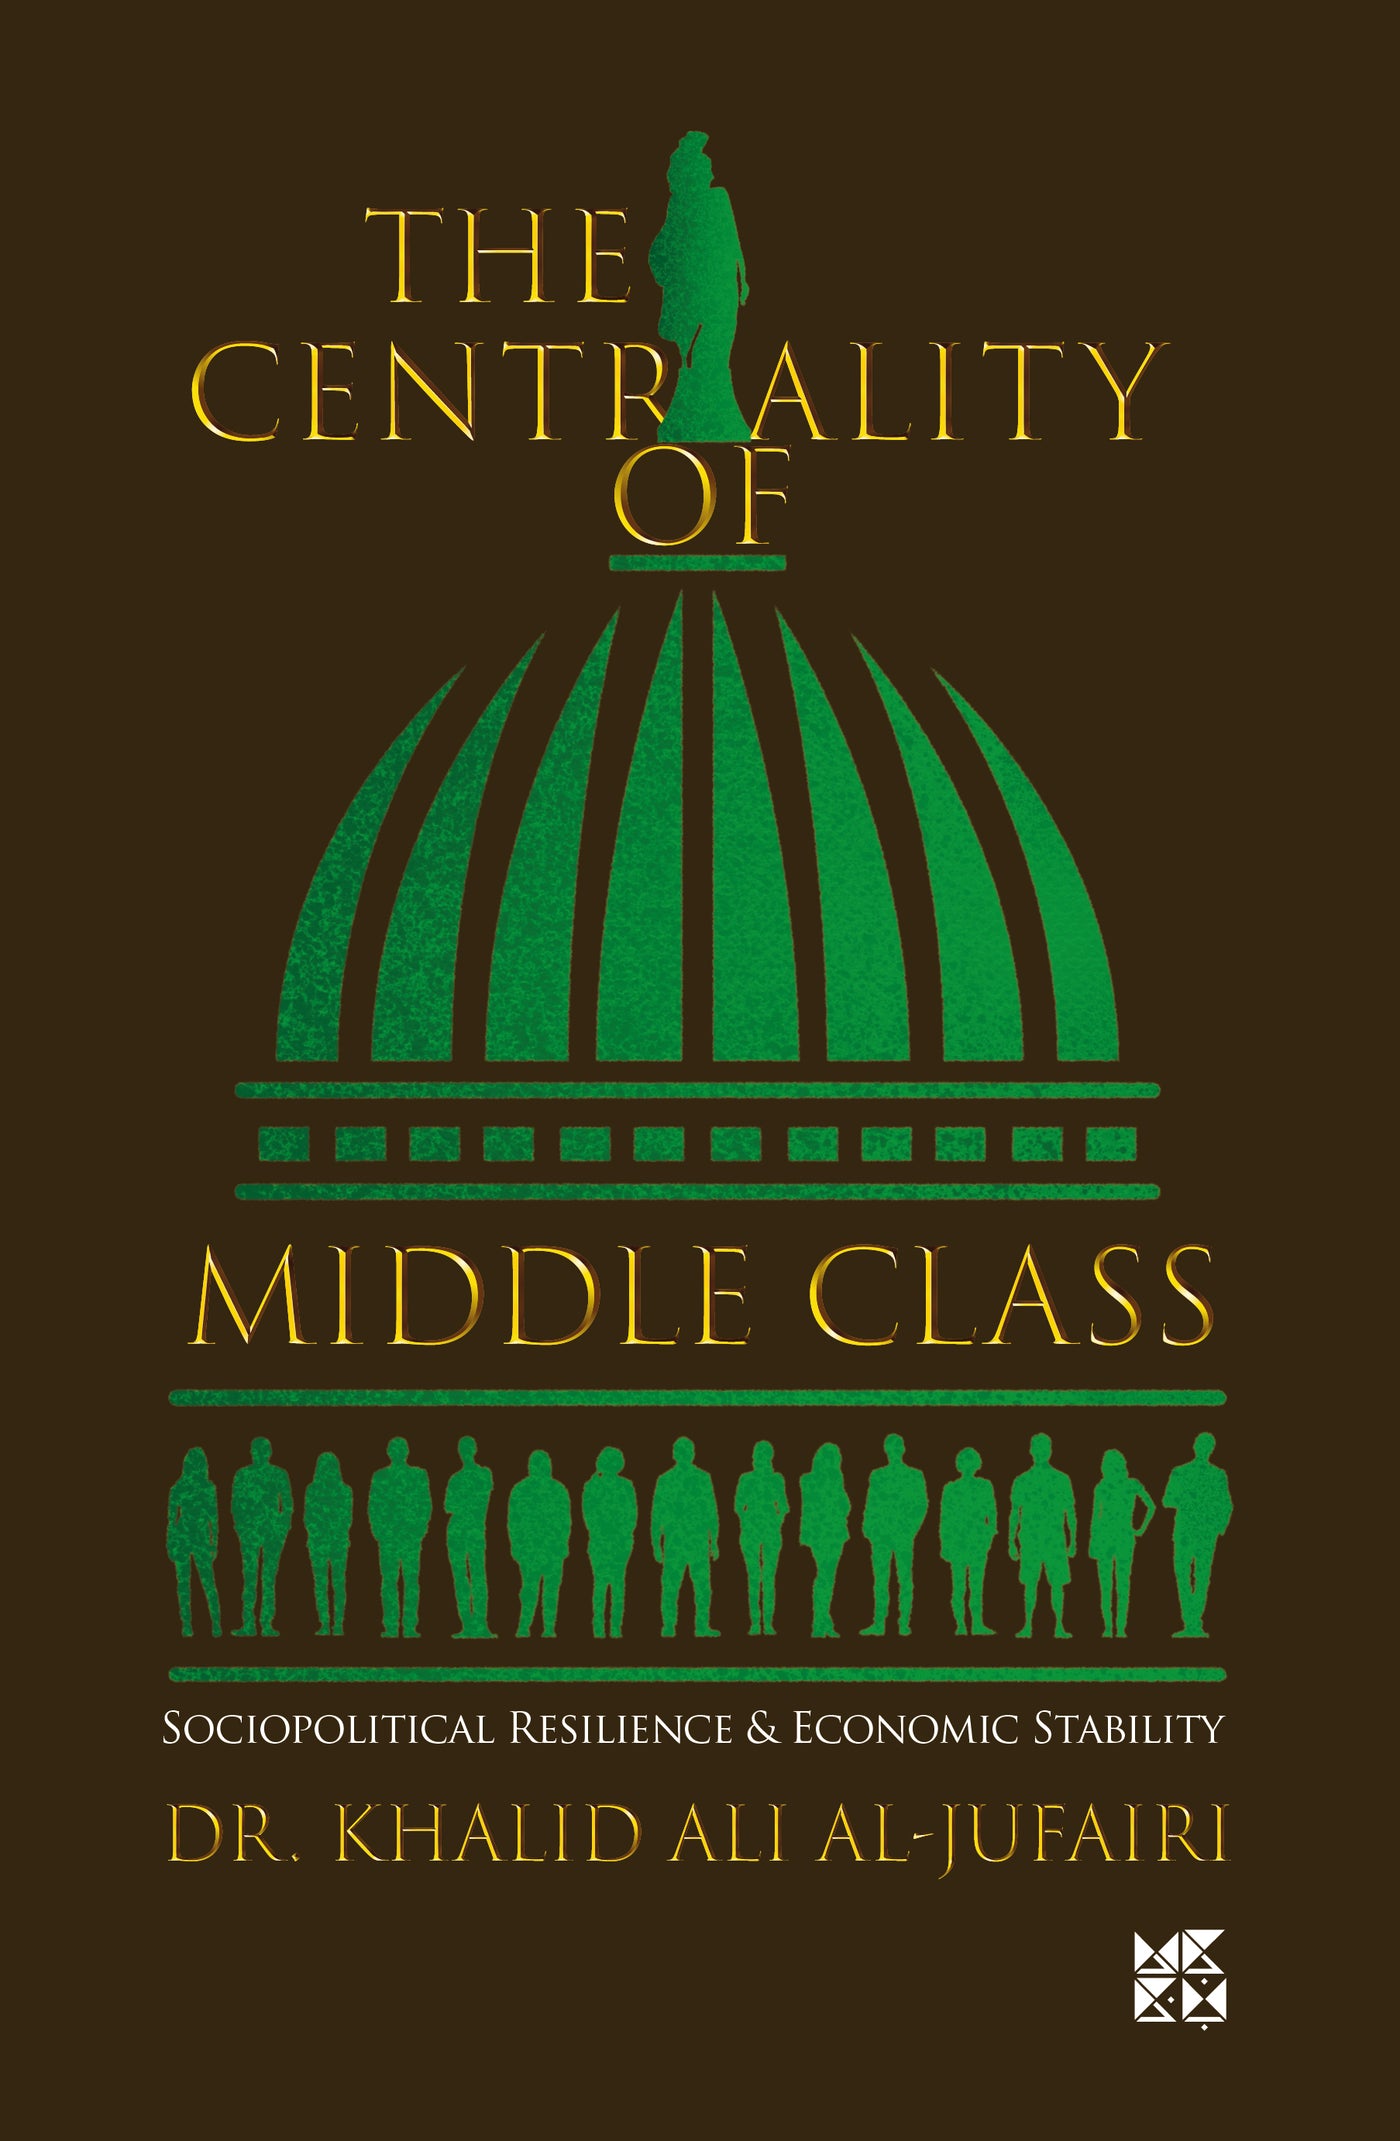 The Centrality of Middle Class - Shaping Political and Economic Landscapes